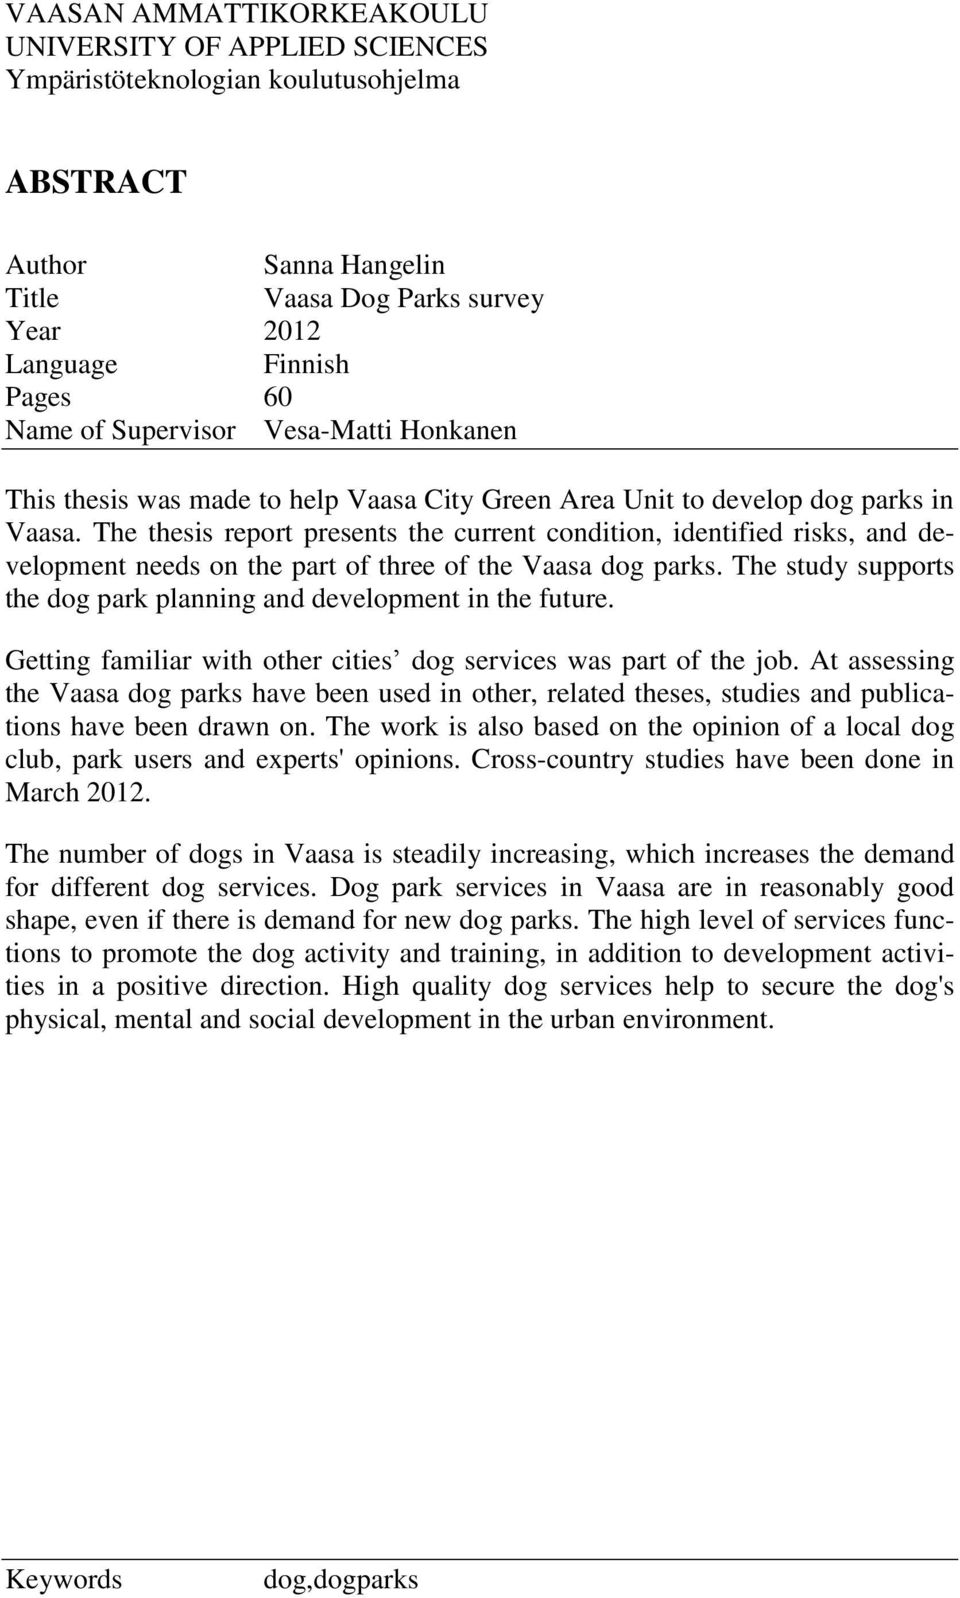 The thesis report presents the current condition, identified risks, and development needs on the part of three of the Vaasa dog parks.